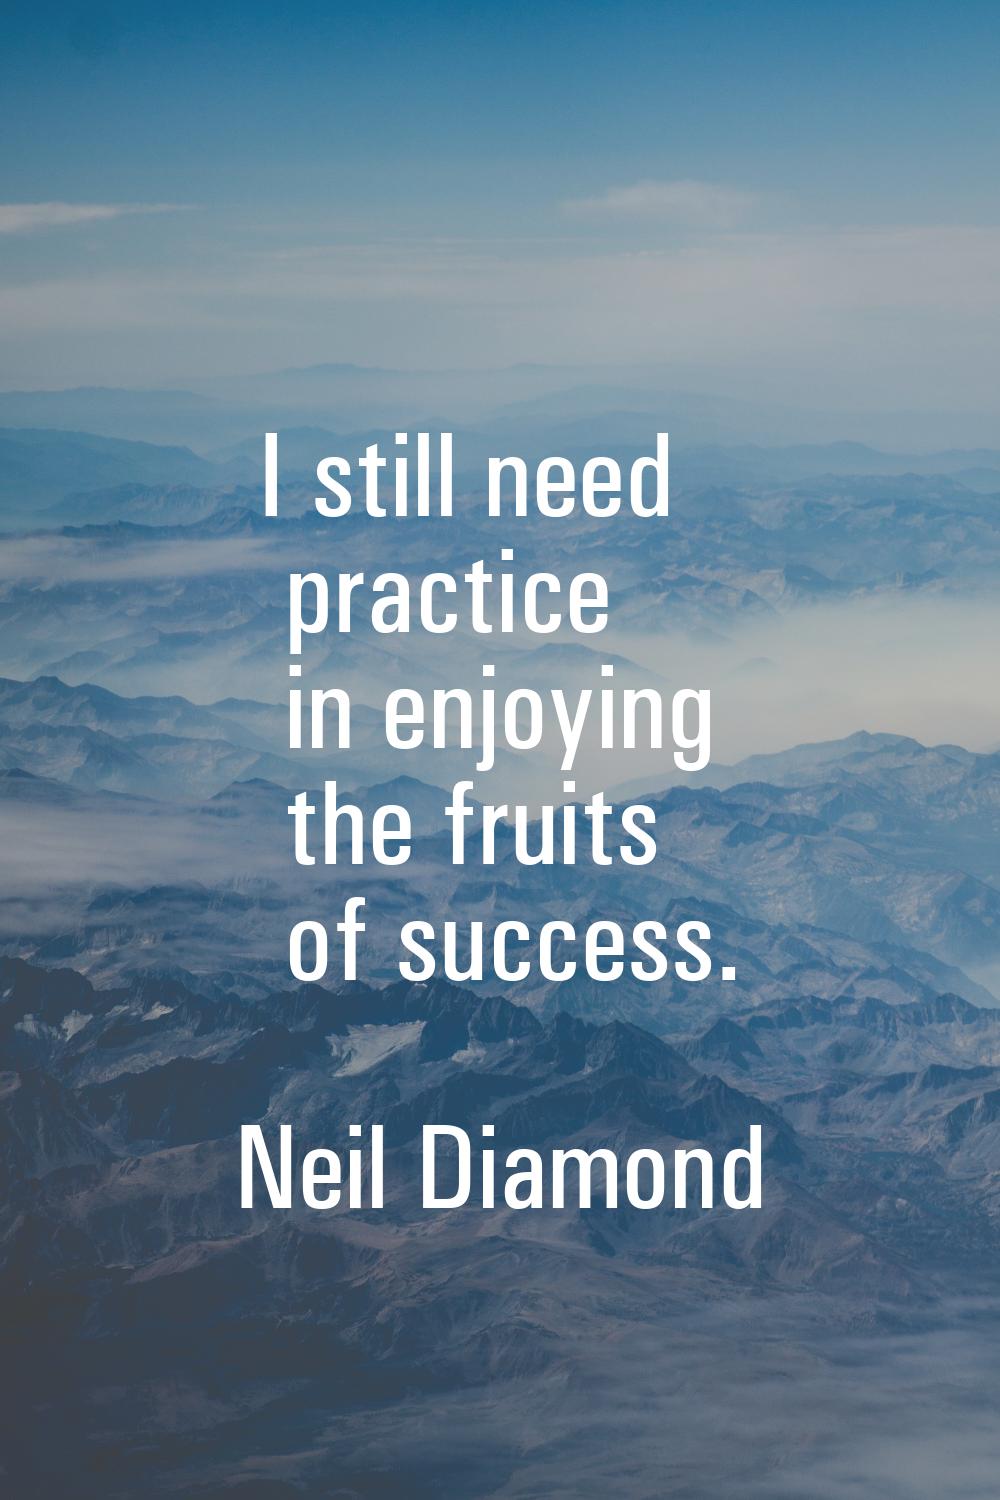 I still need practice in enjoying the fruits of success.